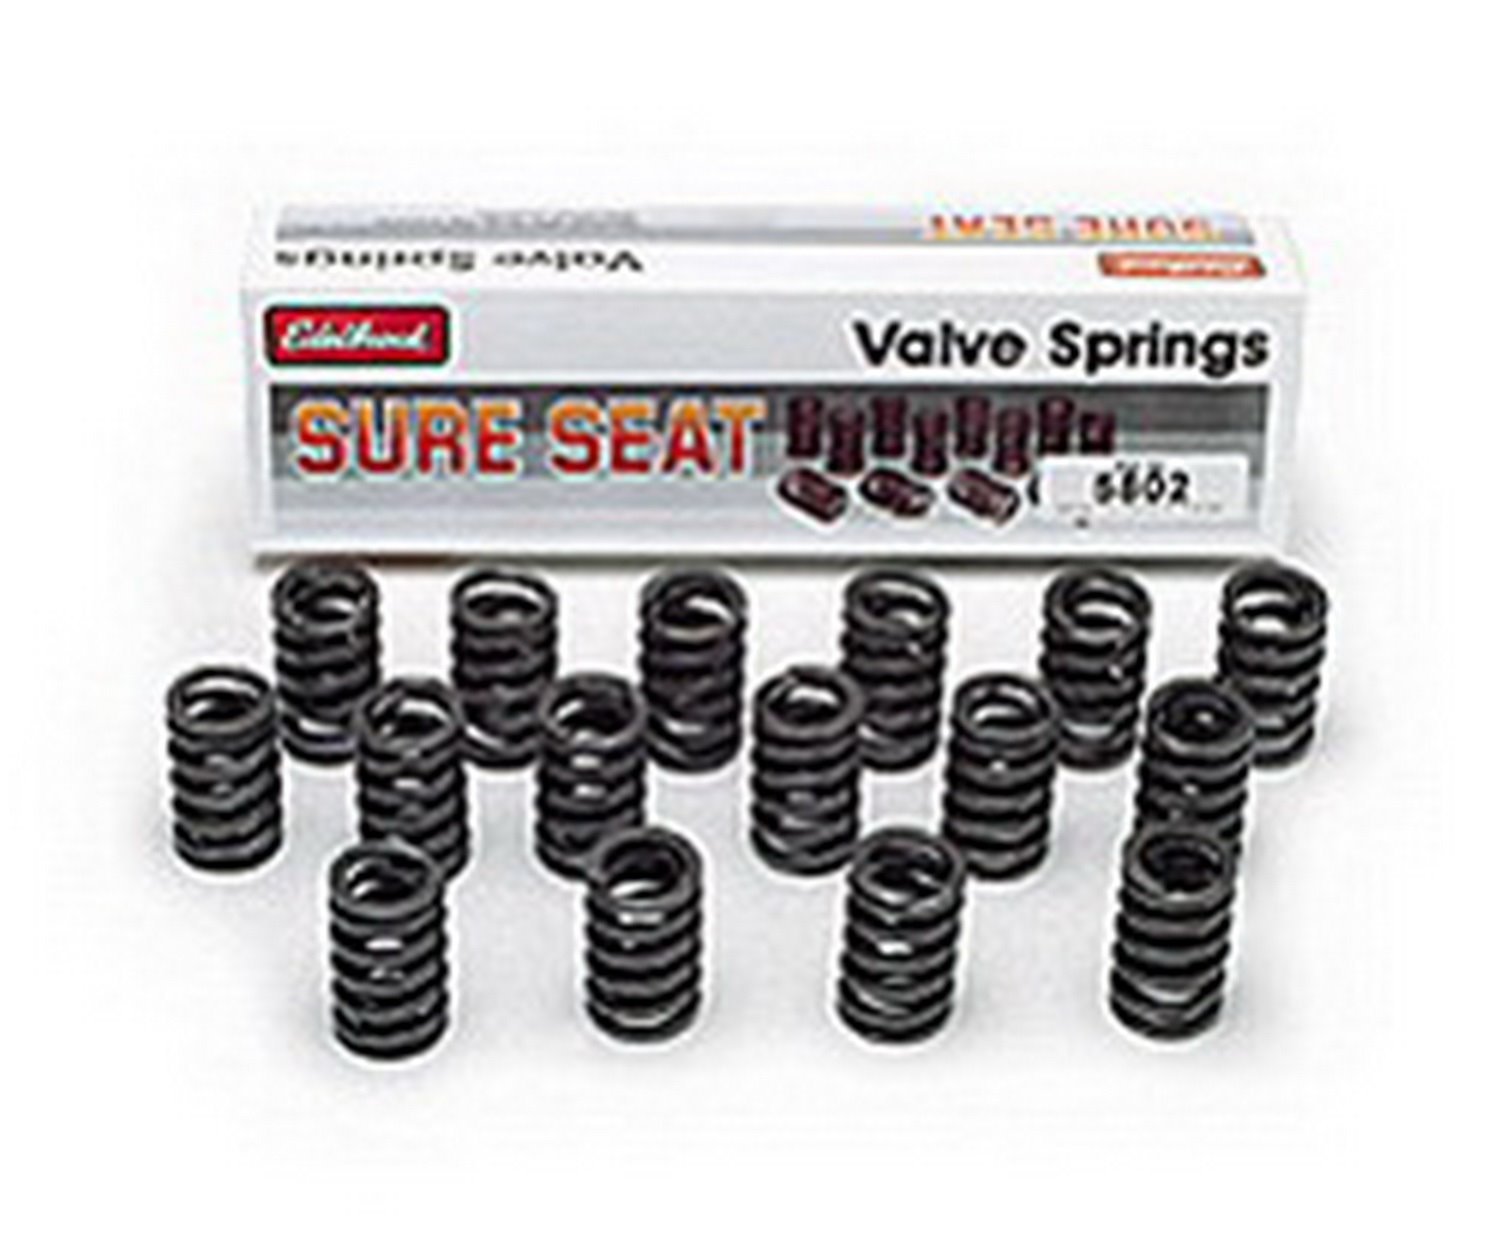 Sure Seat Valve Springs for 1987-1995 Chevy 4.3L 90° V6 OE Cast Iron Head